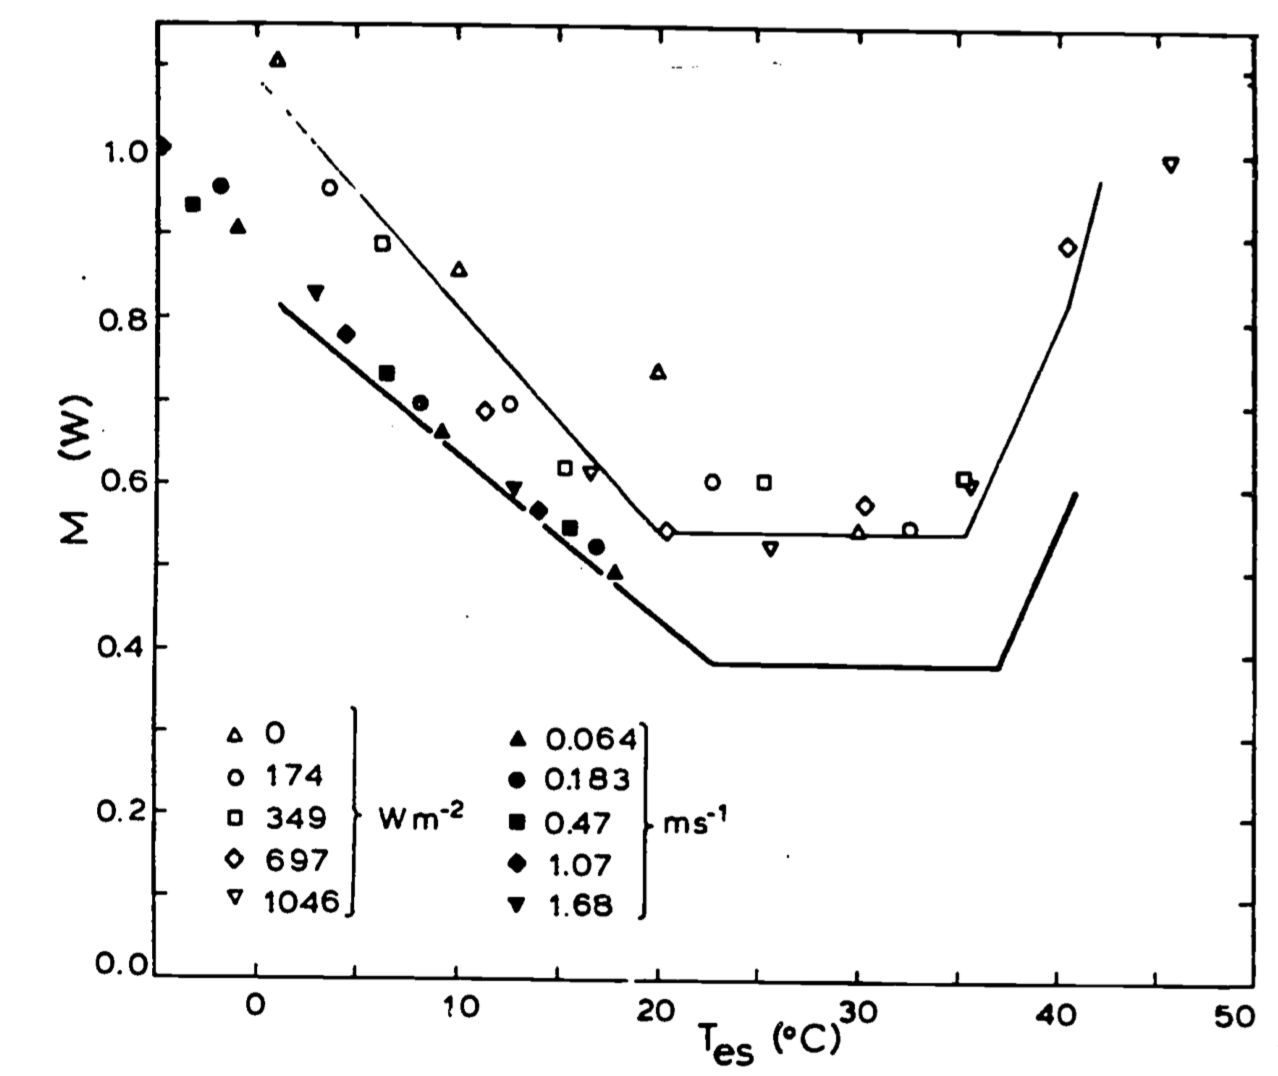 Metabolic rate, $M$, of white-crowned sparrows, plotted as a function of standard operative temperature, $T_{es}$, for three different experiments, The solid line is the regression to the data in King (1964), This study used free convection in a darkened chamber. These conditions impose the least physiological stress, and gives the lowest standard metabolic rate in the thermoneutral zone.The birds were summer acclimated, giving a lower critical temperature of about $23^{\circ}C$, The solid symbols are the results of the study of Robinson et al. (1976), which used forced convection in a darkened chamber, Ran noise produces a slight (average of 11 percent) increase in 14 over King's (1.964) values. Data does not appear to extend into the thermoneutral zone. The open symbols are from DeJong's (1976) study, conducted using free convection in a chamber with various levels of visible radiation, The use of illuminated birds in the active part of their diurnal cycle gives the highest values of $M$. As these birds are winter-acclimated, the lower critical temperature is around $20^{\circ}C$. Note that the use of standard operative temperature allows the comparison of purely physiological differences under equivalent thermal conditions for different combinations of wind, radiation and air temperature.